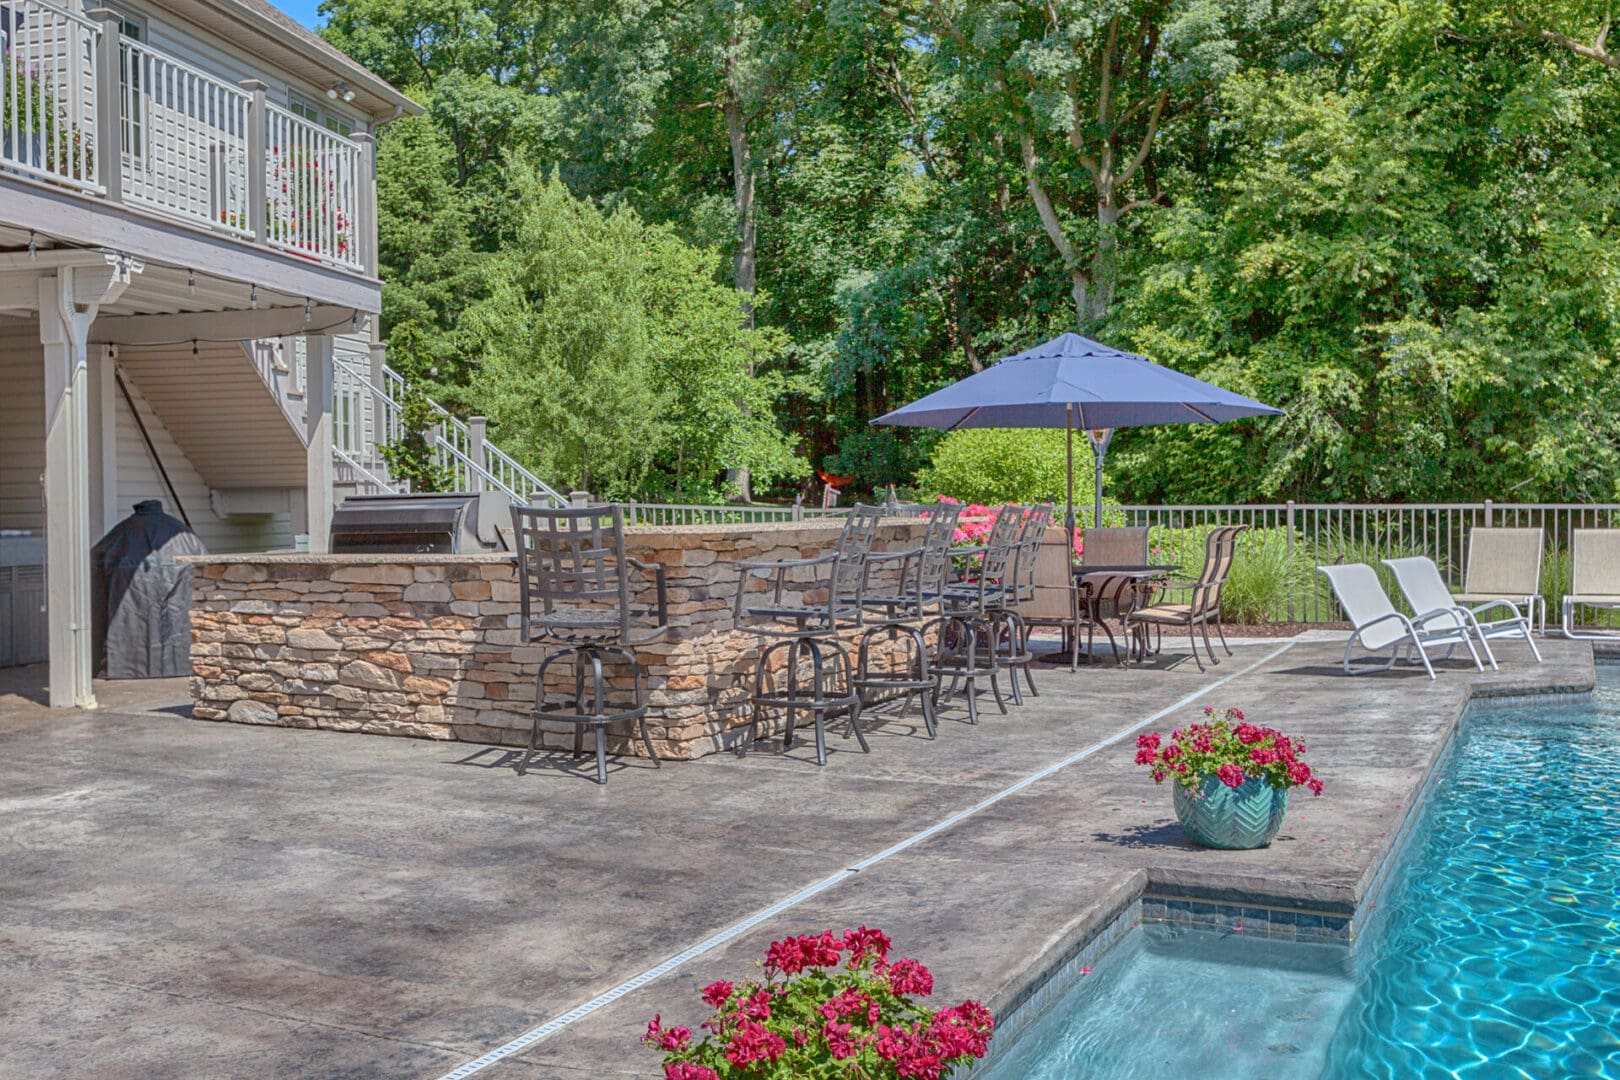 A backyard with a pool, custom outdoor kitchens, and patio furniture.